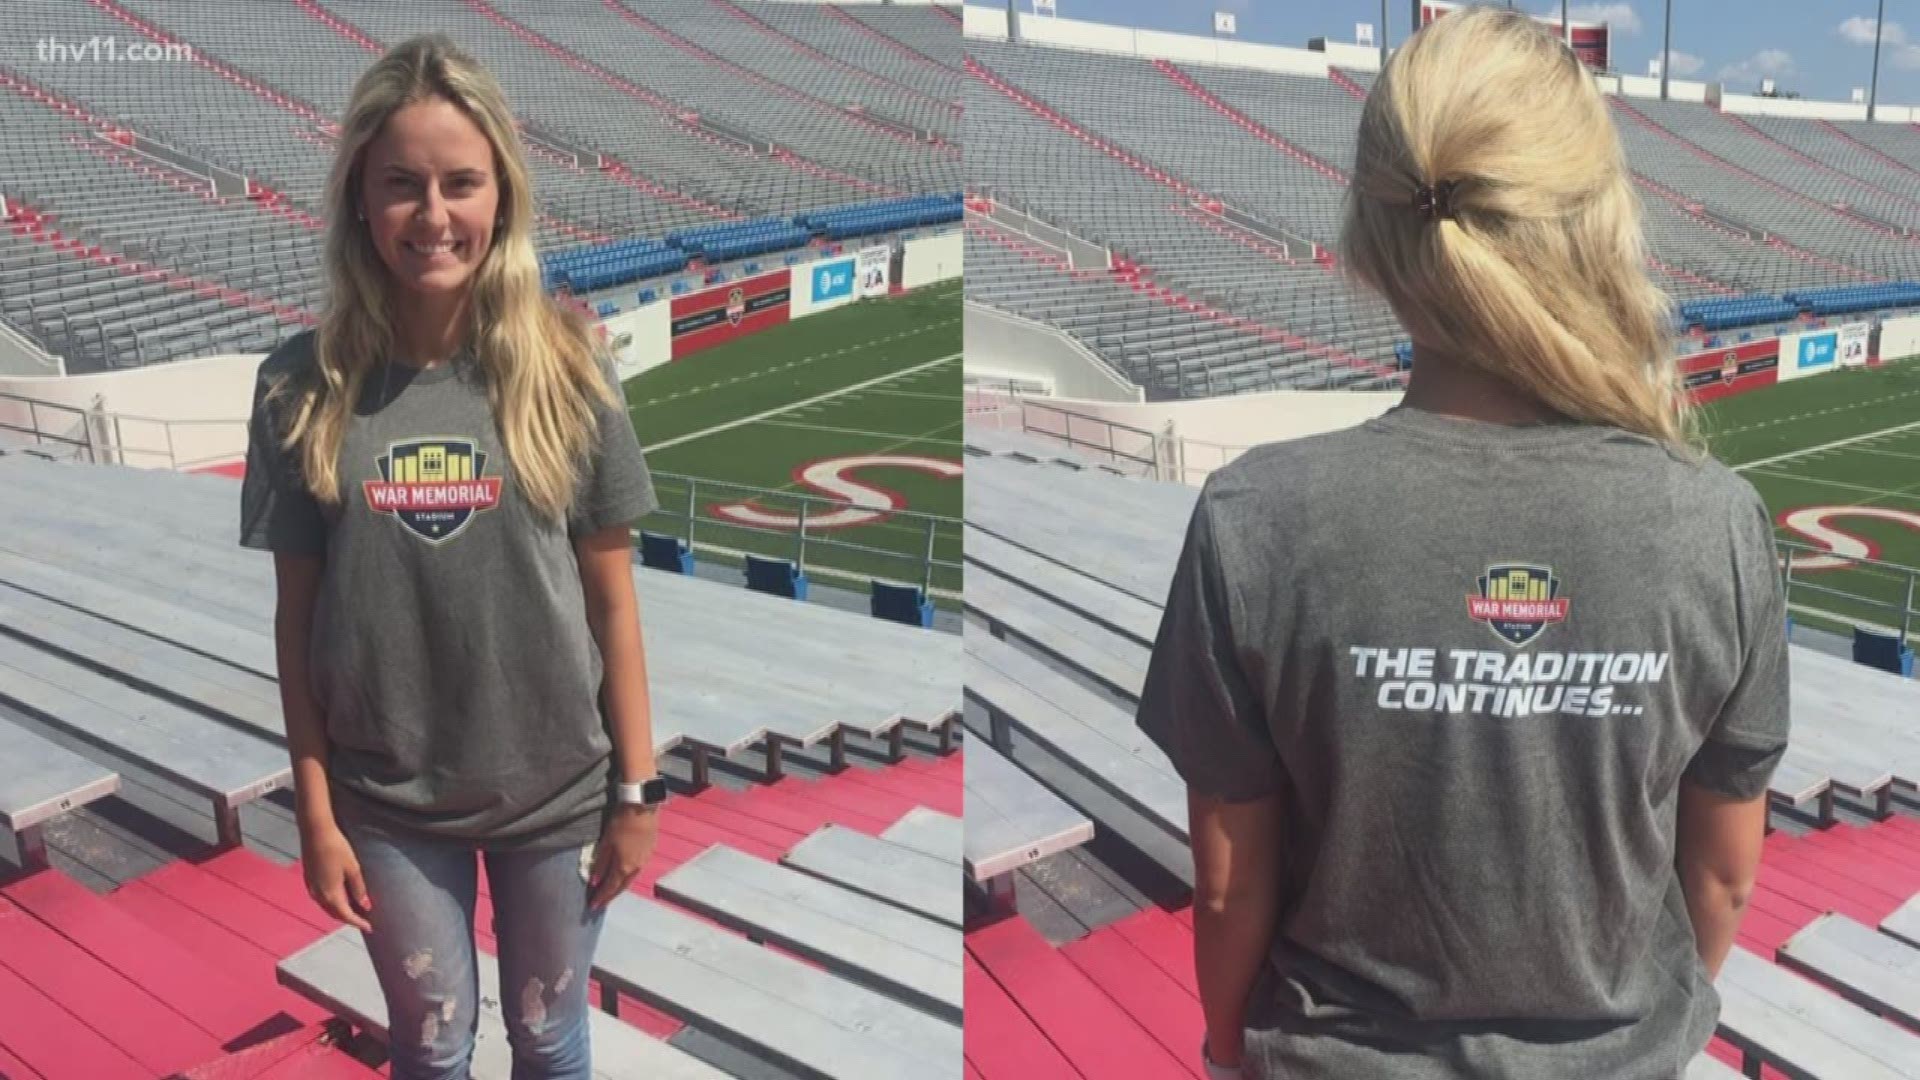 The shirt says 'War Memorial Stadium' on the front and 'The Tradition continues' on the back.